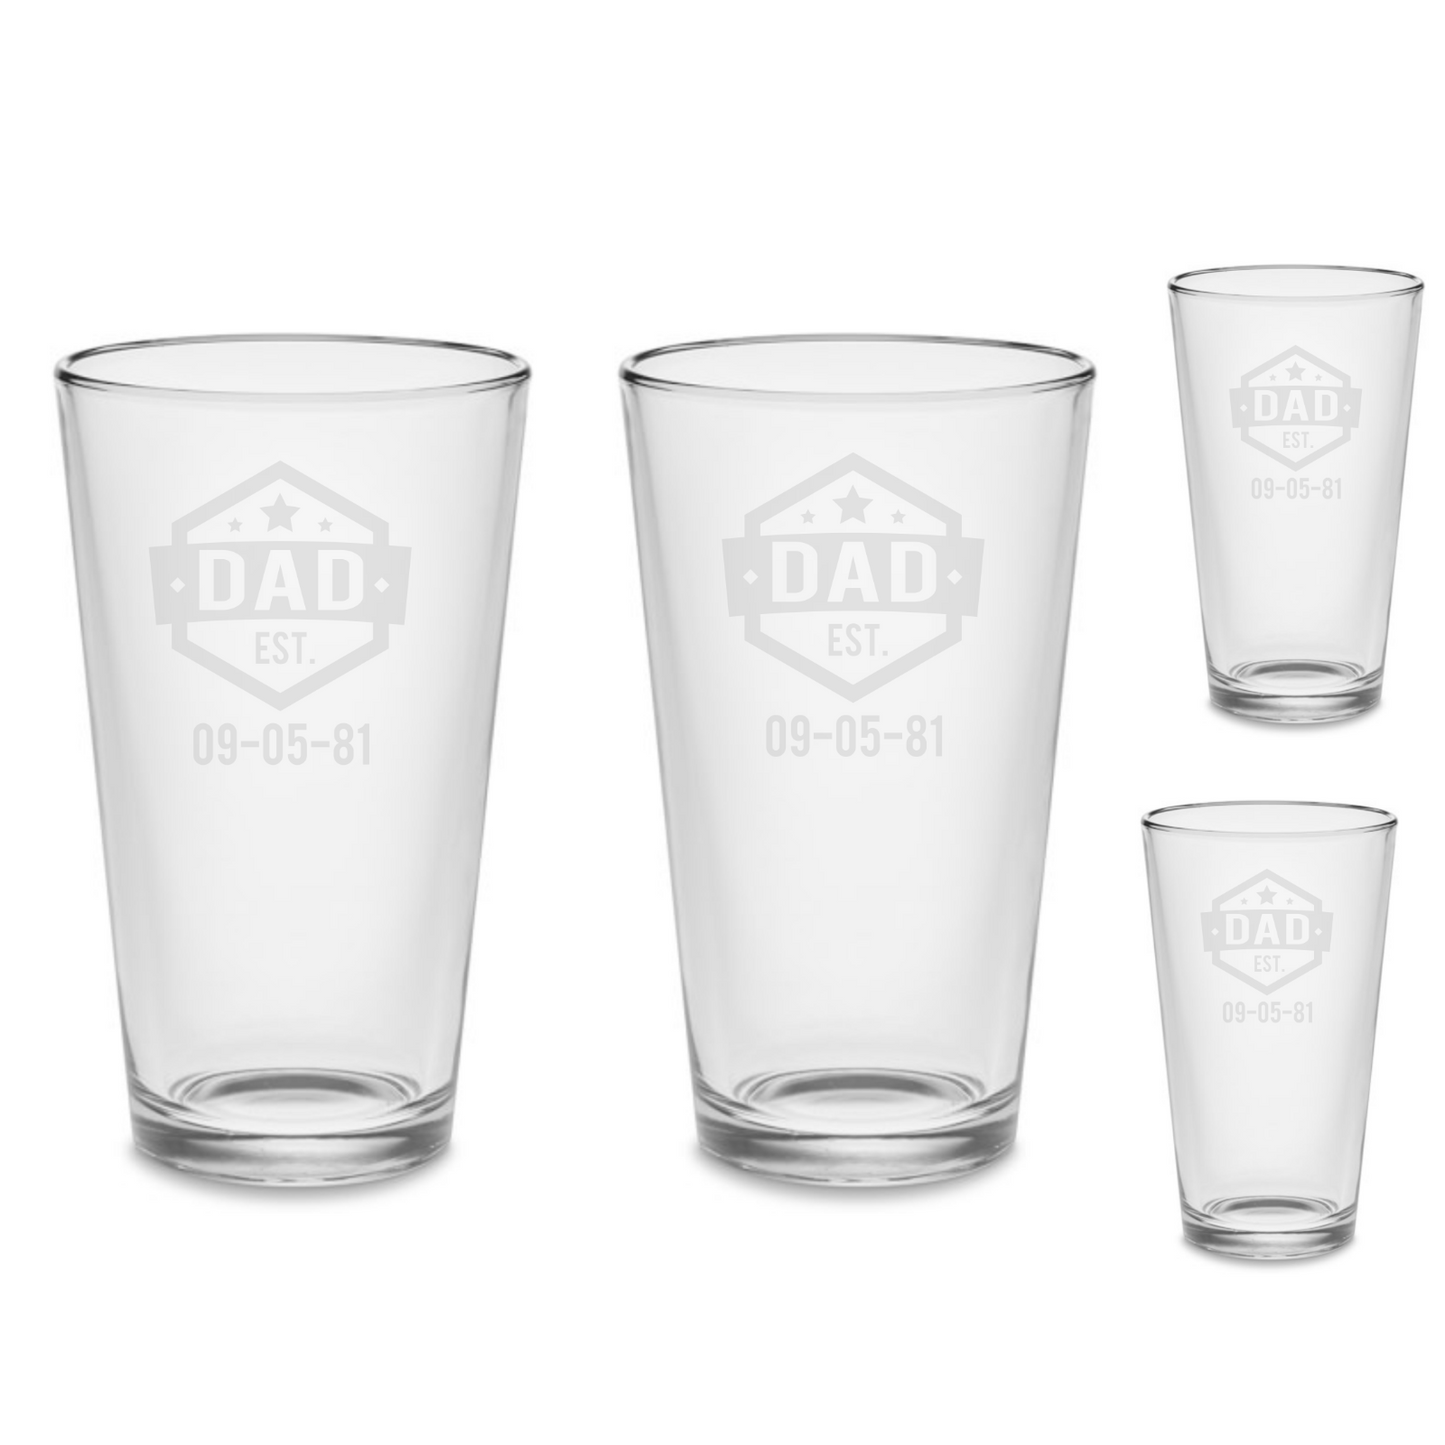 SET Dad Established Custom Pint Beer Glasses Tumblers Drinkware 16 oz. Cocktail Mixing Glass Gifts